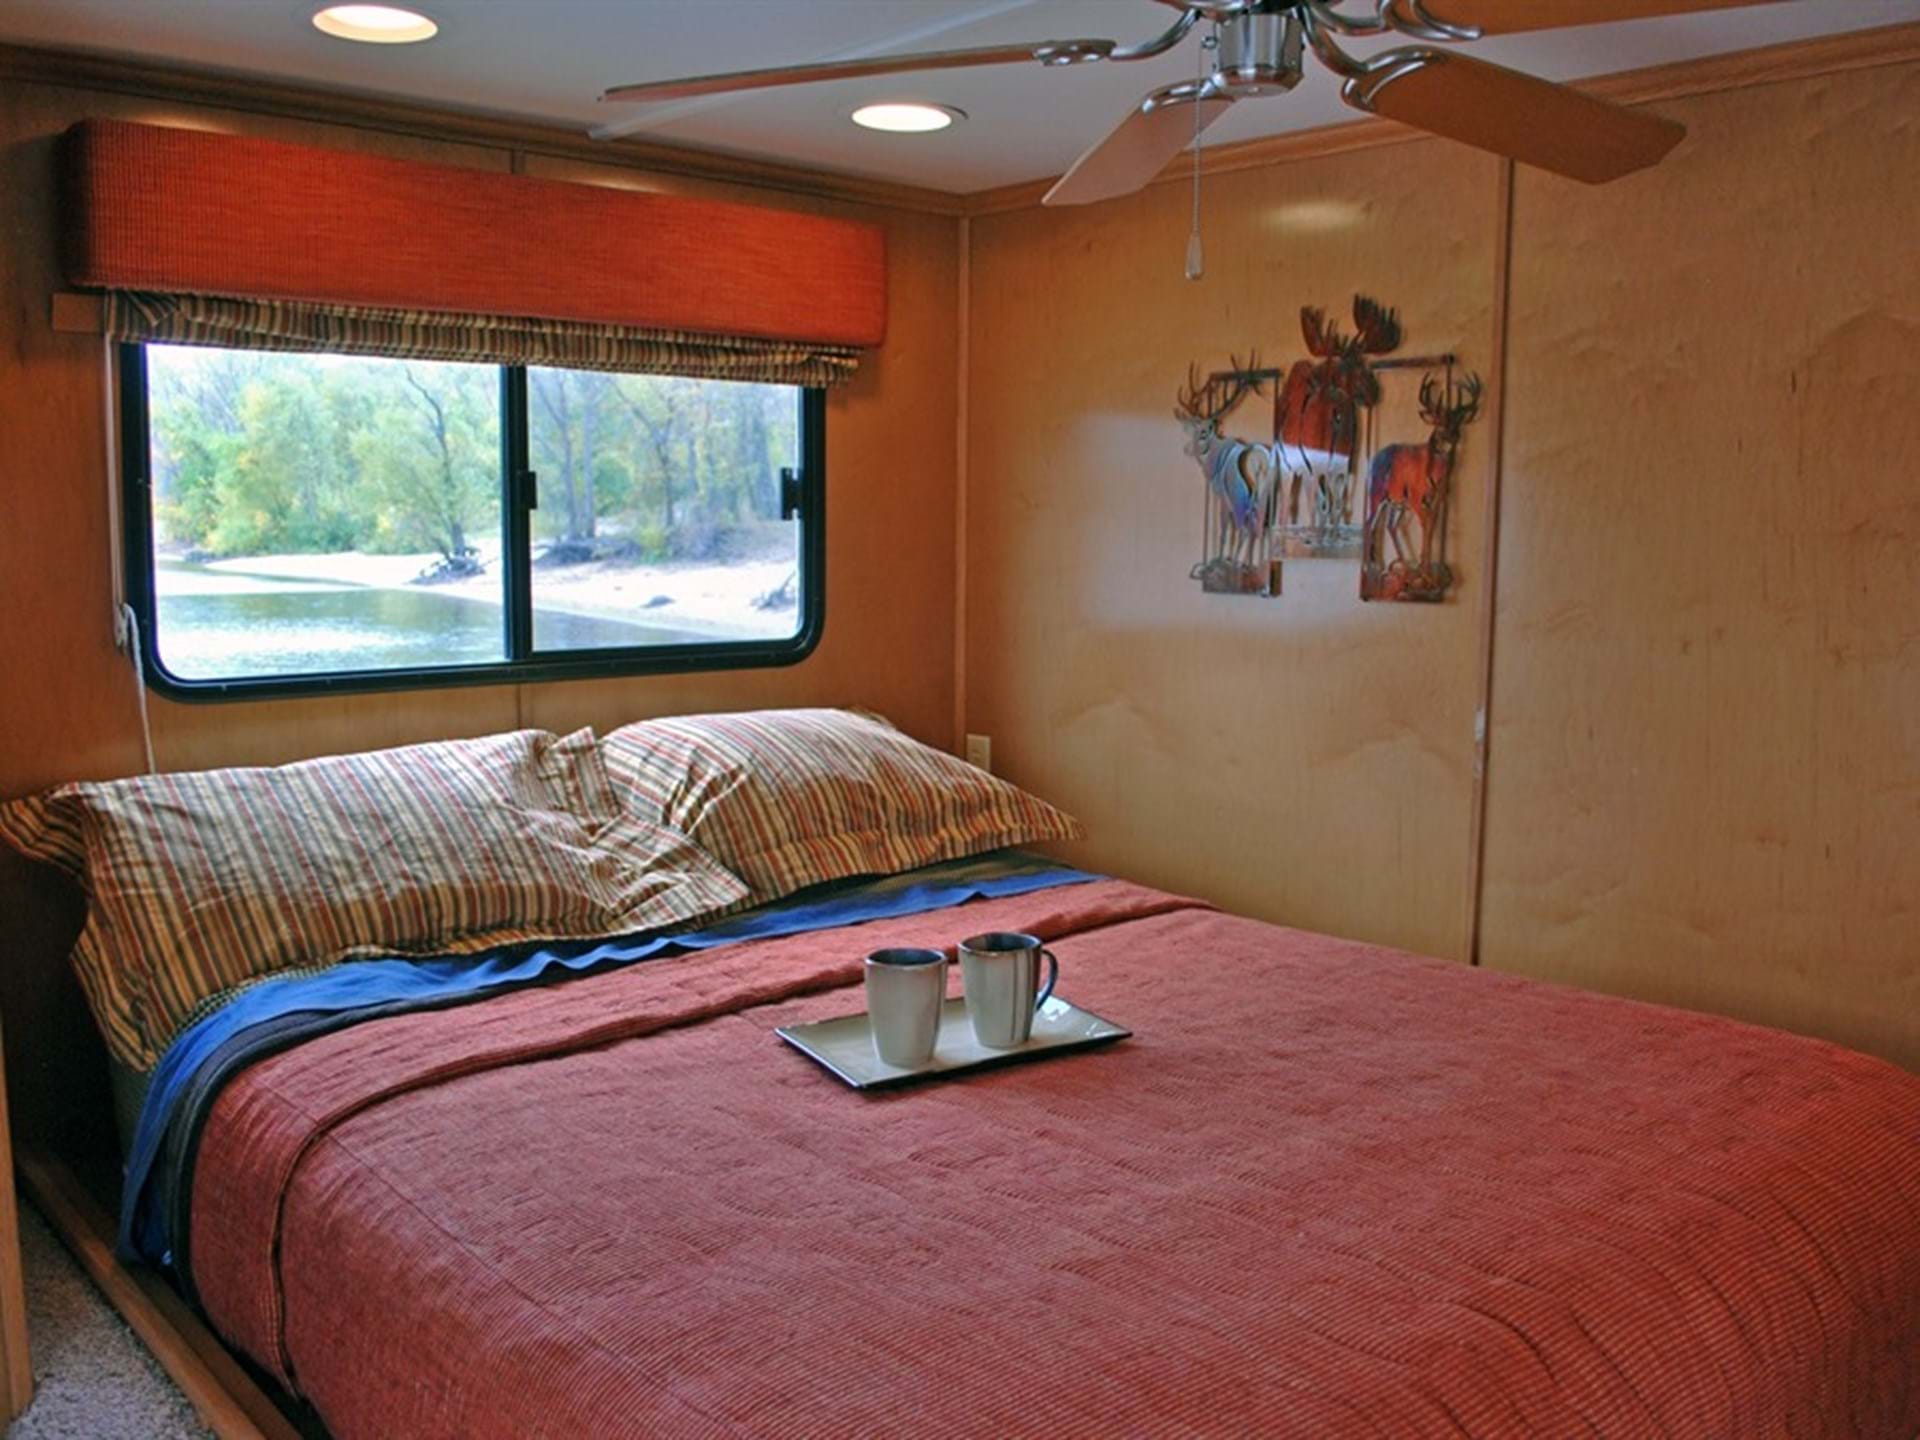 This boat has 4 separate bedrooms